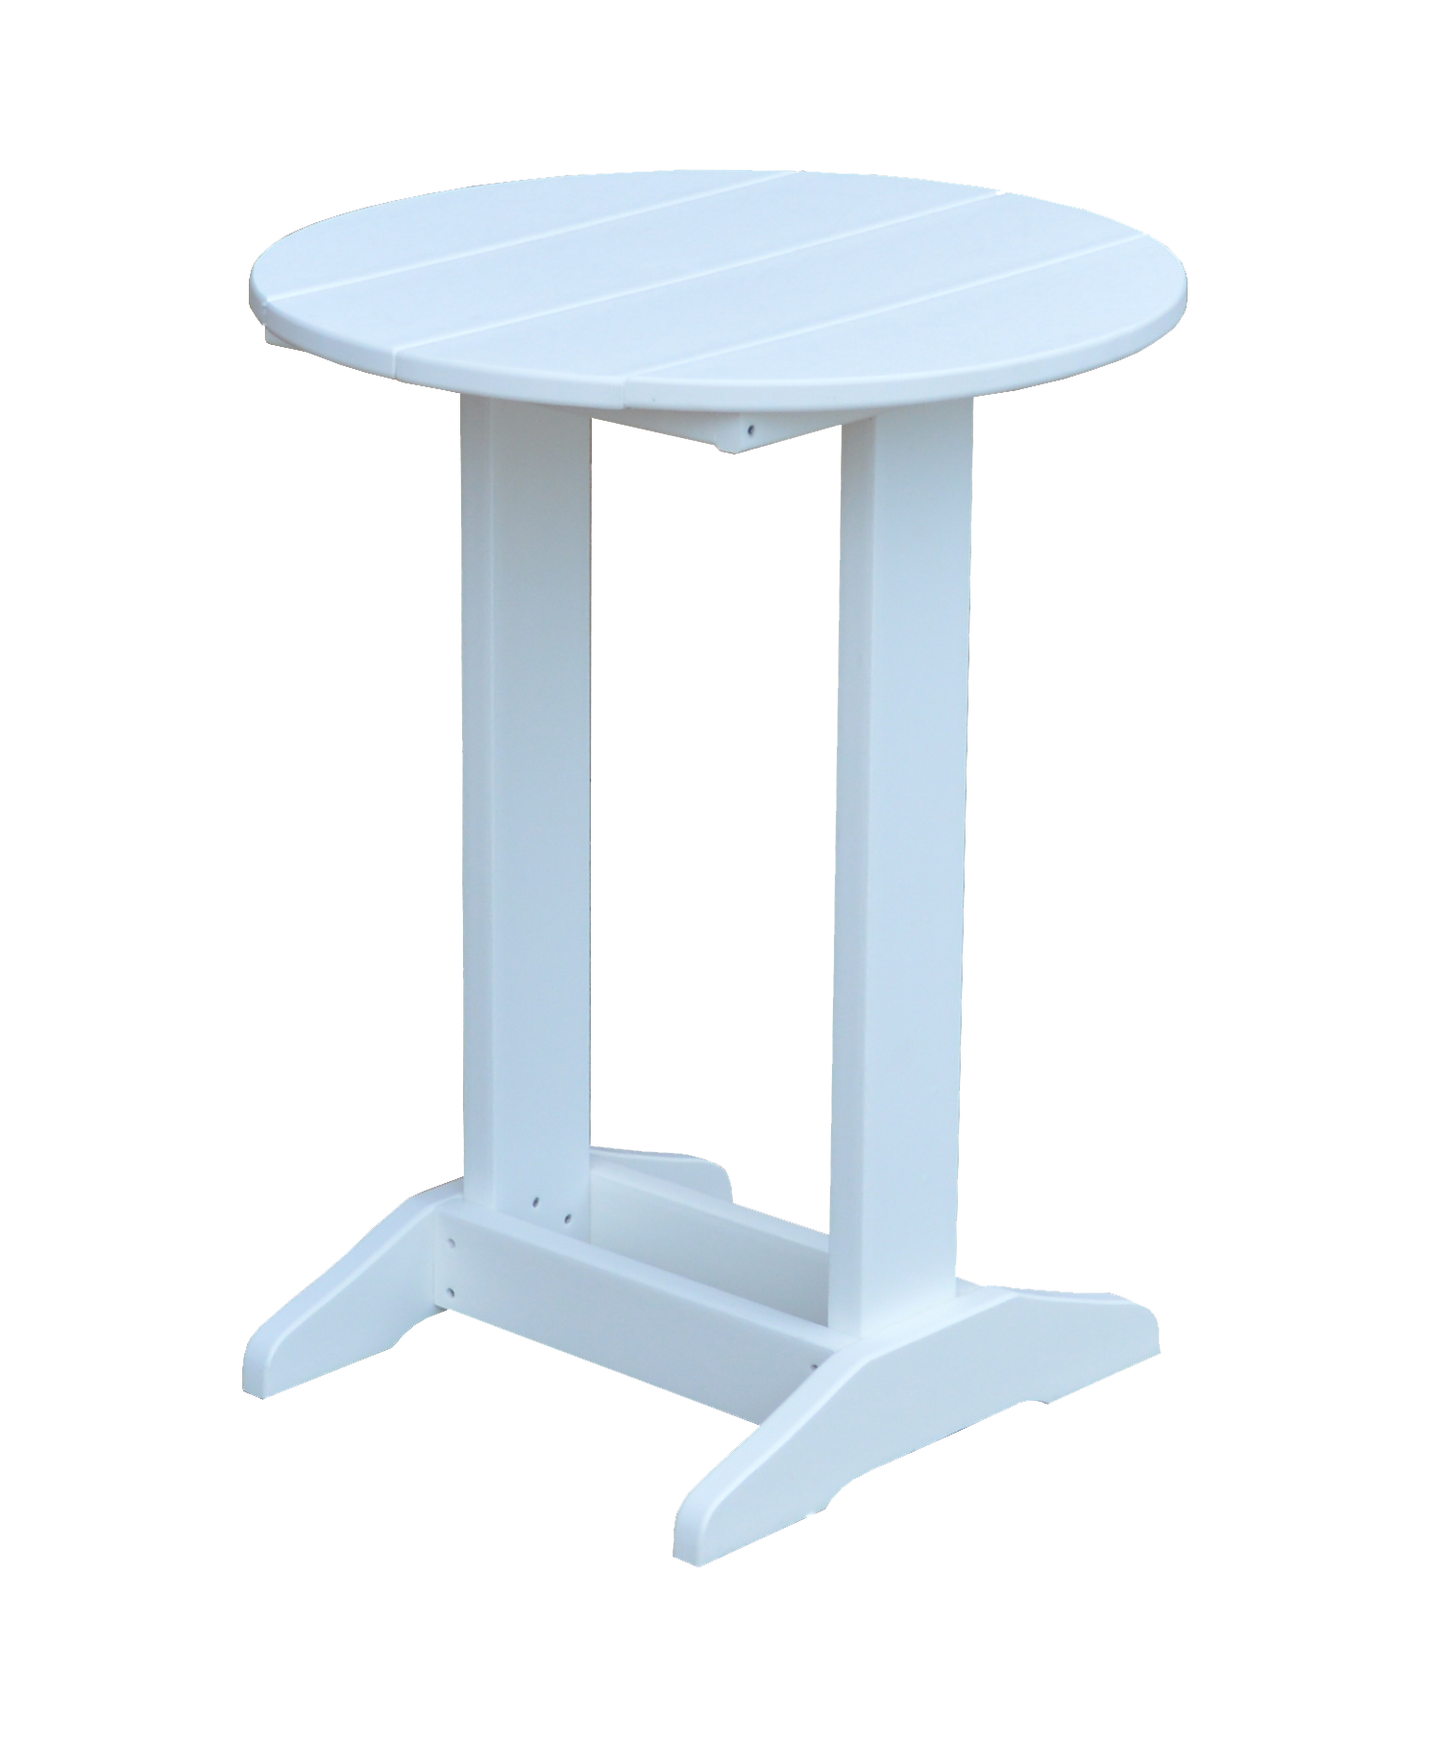 A&L Furniture Co. Recycled Plastic Round Balcony Side Table (PAIRS W/ COUNTER HEIGHT FURNITURE) - LEAD TIME TO SHIP 10 BUSINESS DAYS